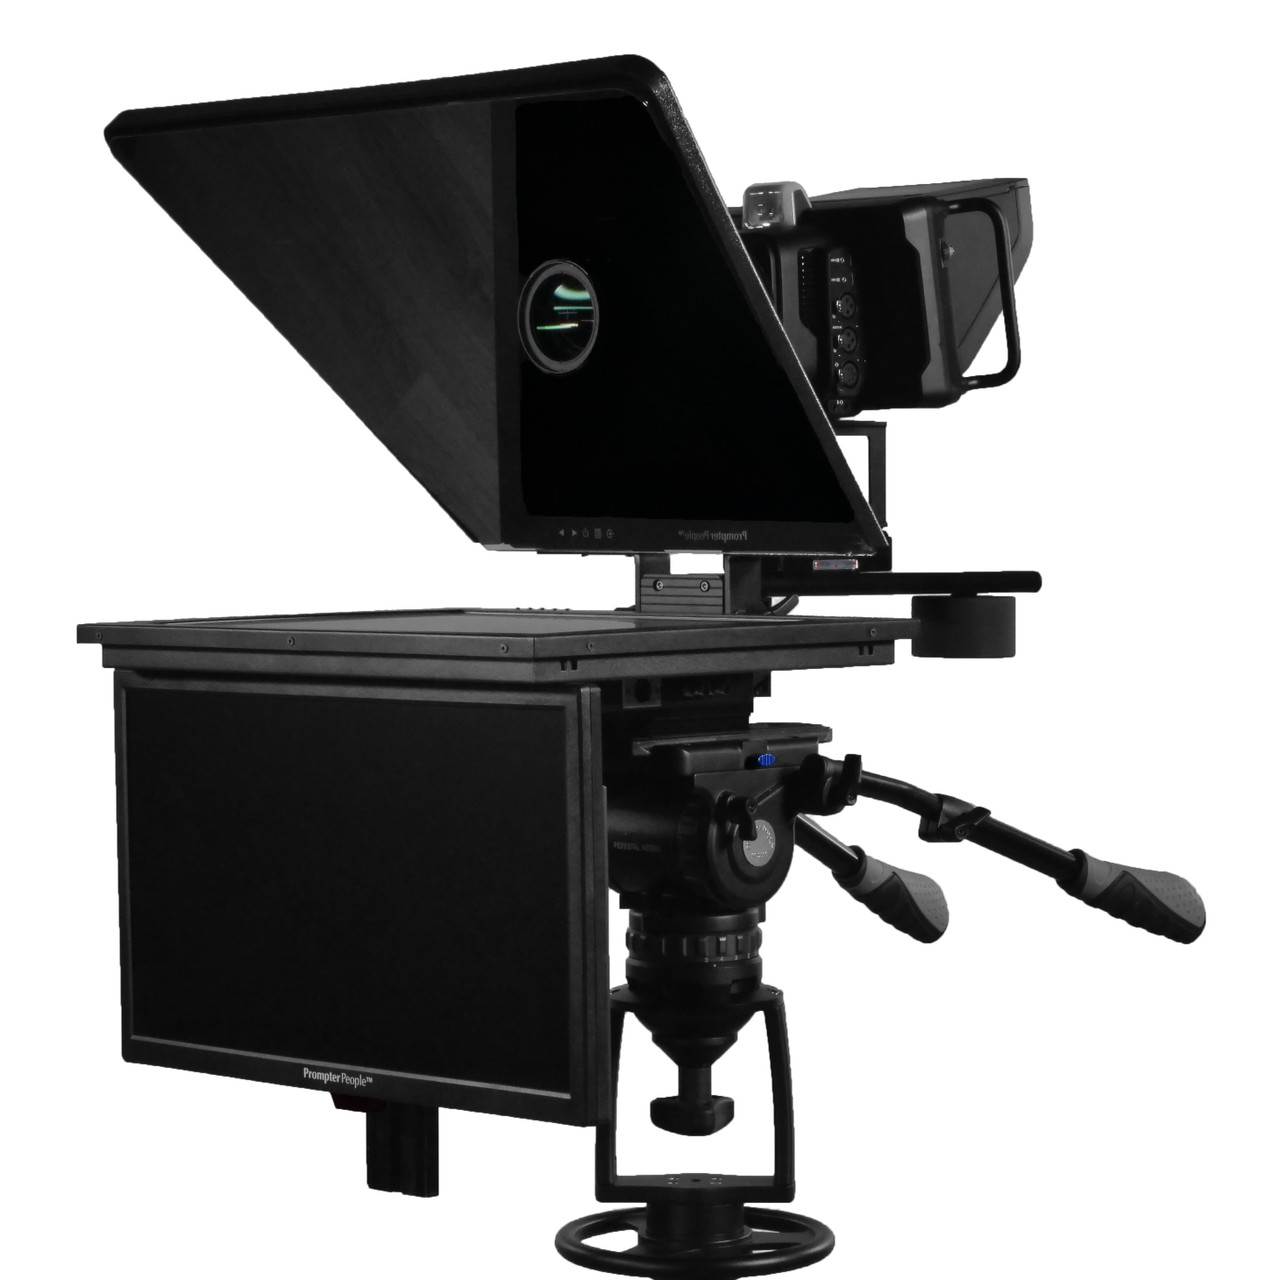 Flex Plus Talent Monitor Teleprompter | 19" 1000 NIT High Bright Prompting Monitor 3G-SDI | HDMI | VGA with 18.5" Color Accurate RGB IPS 3G-SDI Talent Monitor